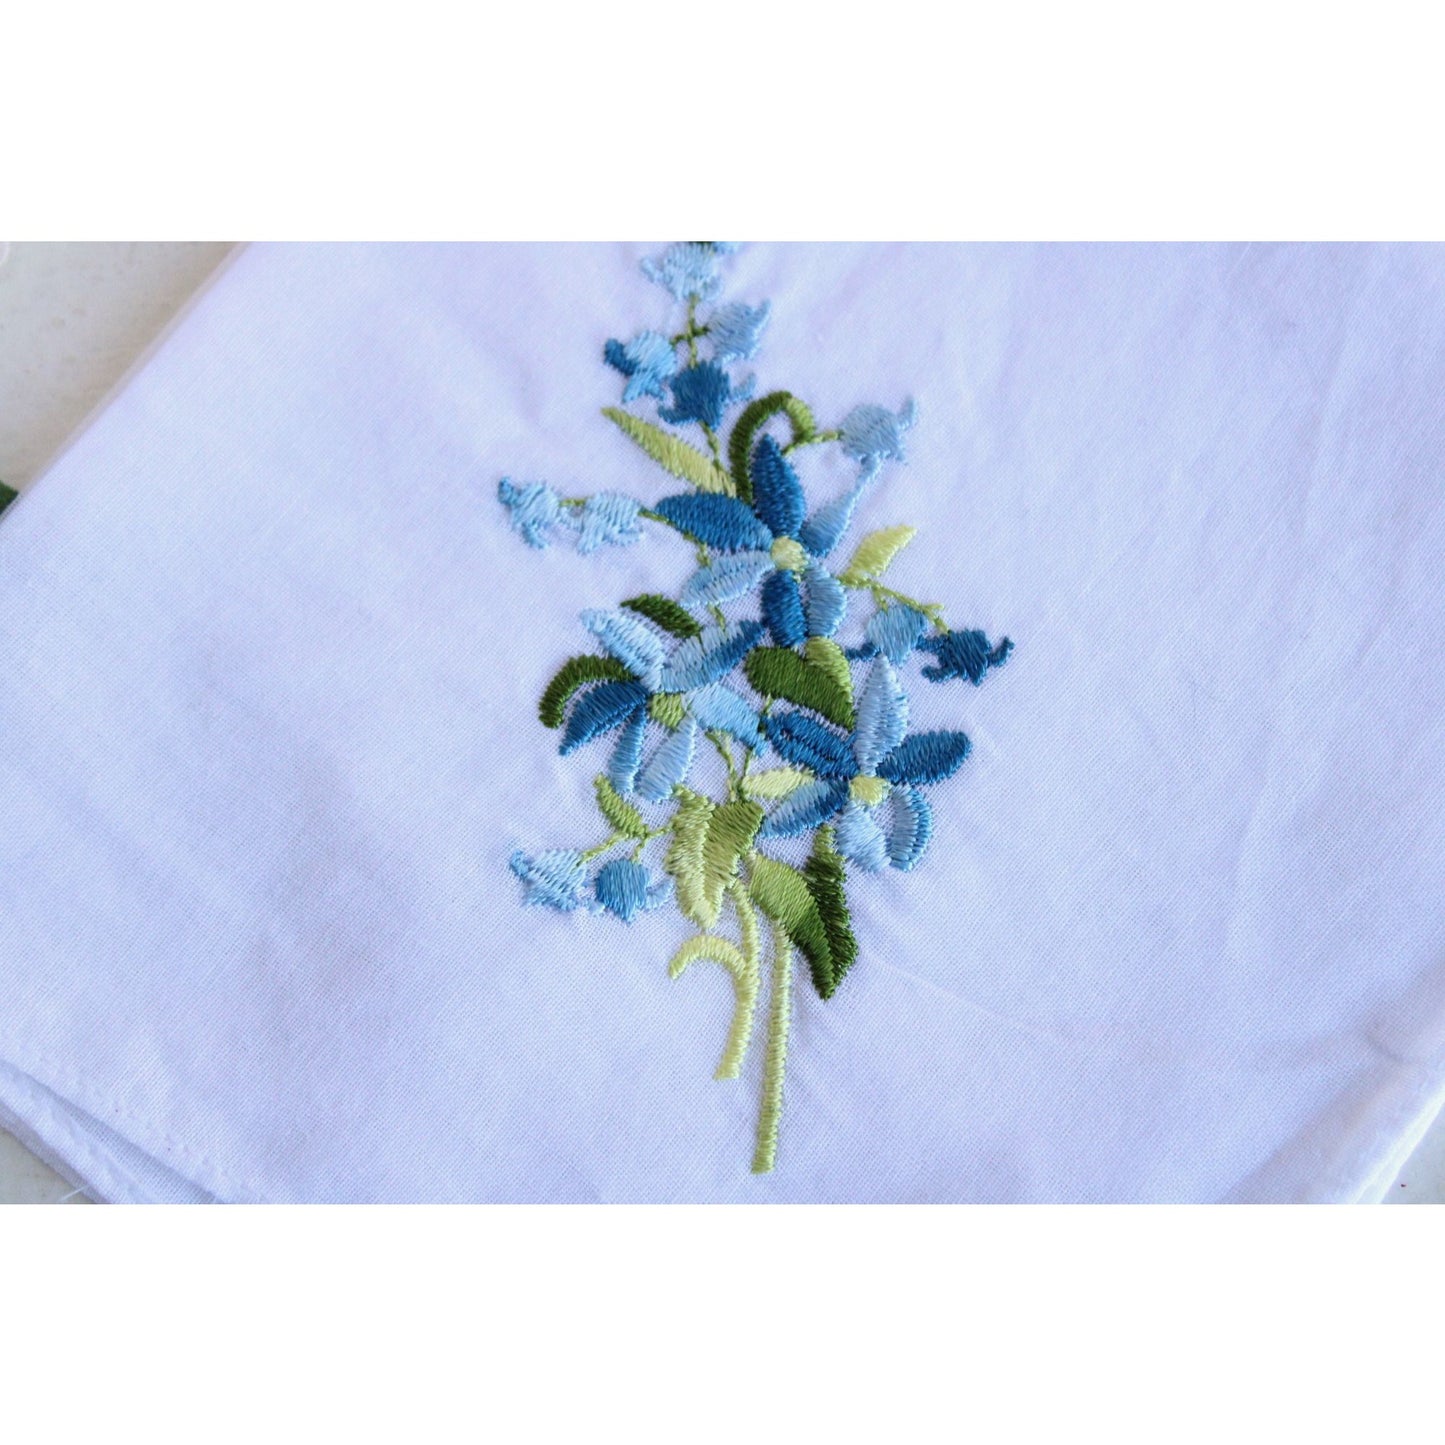 Vintage White Linen With Blue Embroidered Flowers Hankie